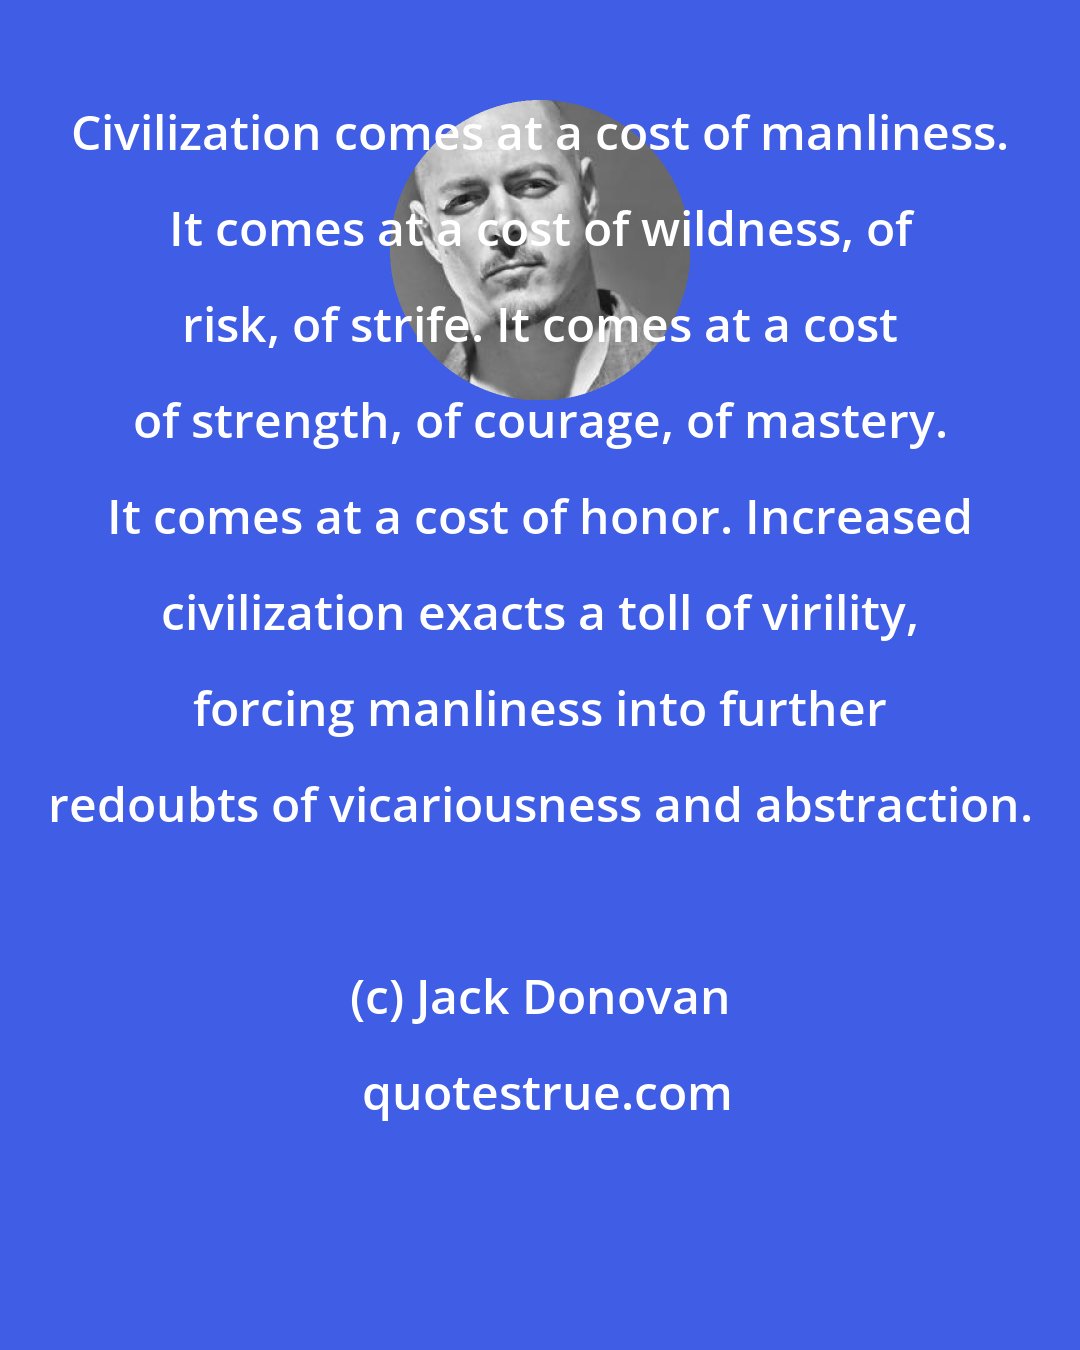 Jack Donovan: Civilization comes at a cost of manliness. It comes at a cost of wildness, of risk, of strife. It comes at a cost of strength, of courage, of mastery. It comes at a cost of honor. Increased civilization exacts a toll of virility, forcing manliness into further redoubts of vicariousness and abstraction.